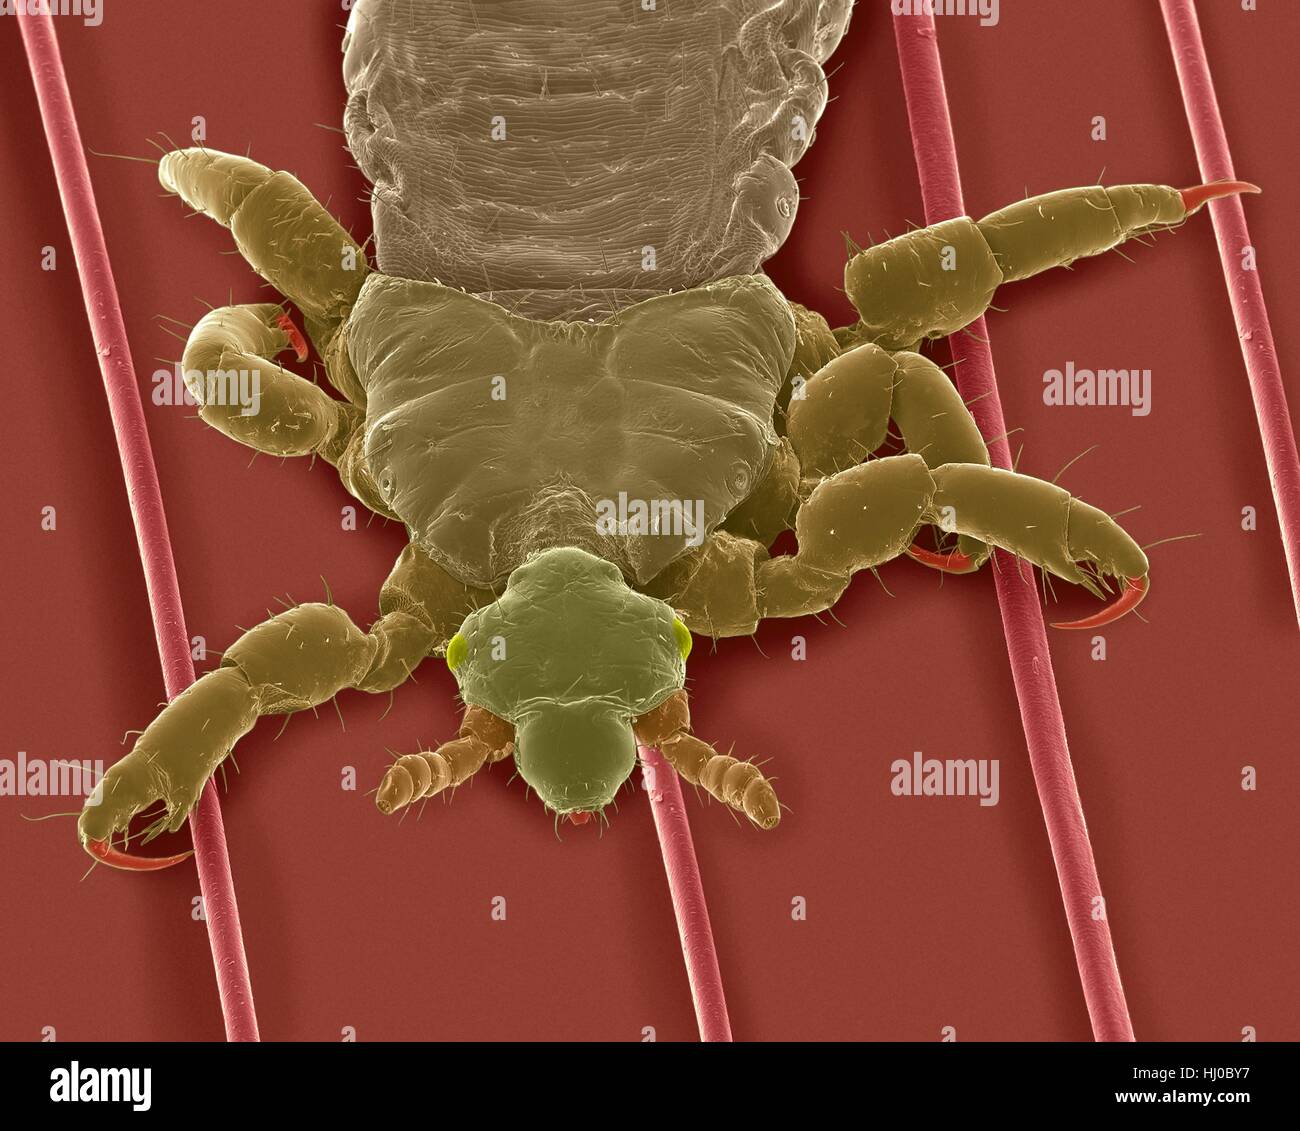 Coloured scanning electron micrograph (SEM) of Human head louse on human hair (Pediculus humanus capitis).The head louse (Pediculus humanus capitis) is insect in Order Psocodea (parasitic lice,formerly Order Phthiraptera/Pscocptera).Head lice are ectoparasites humans as only host.A head louse must Stock Photo